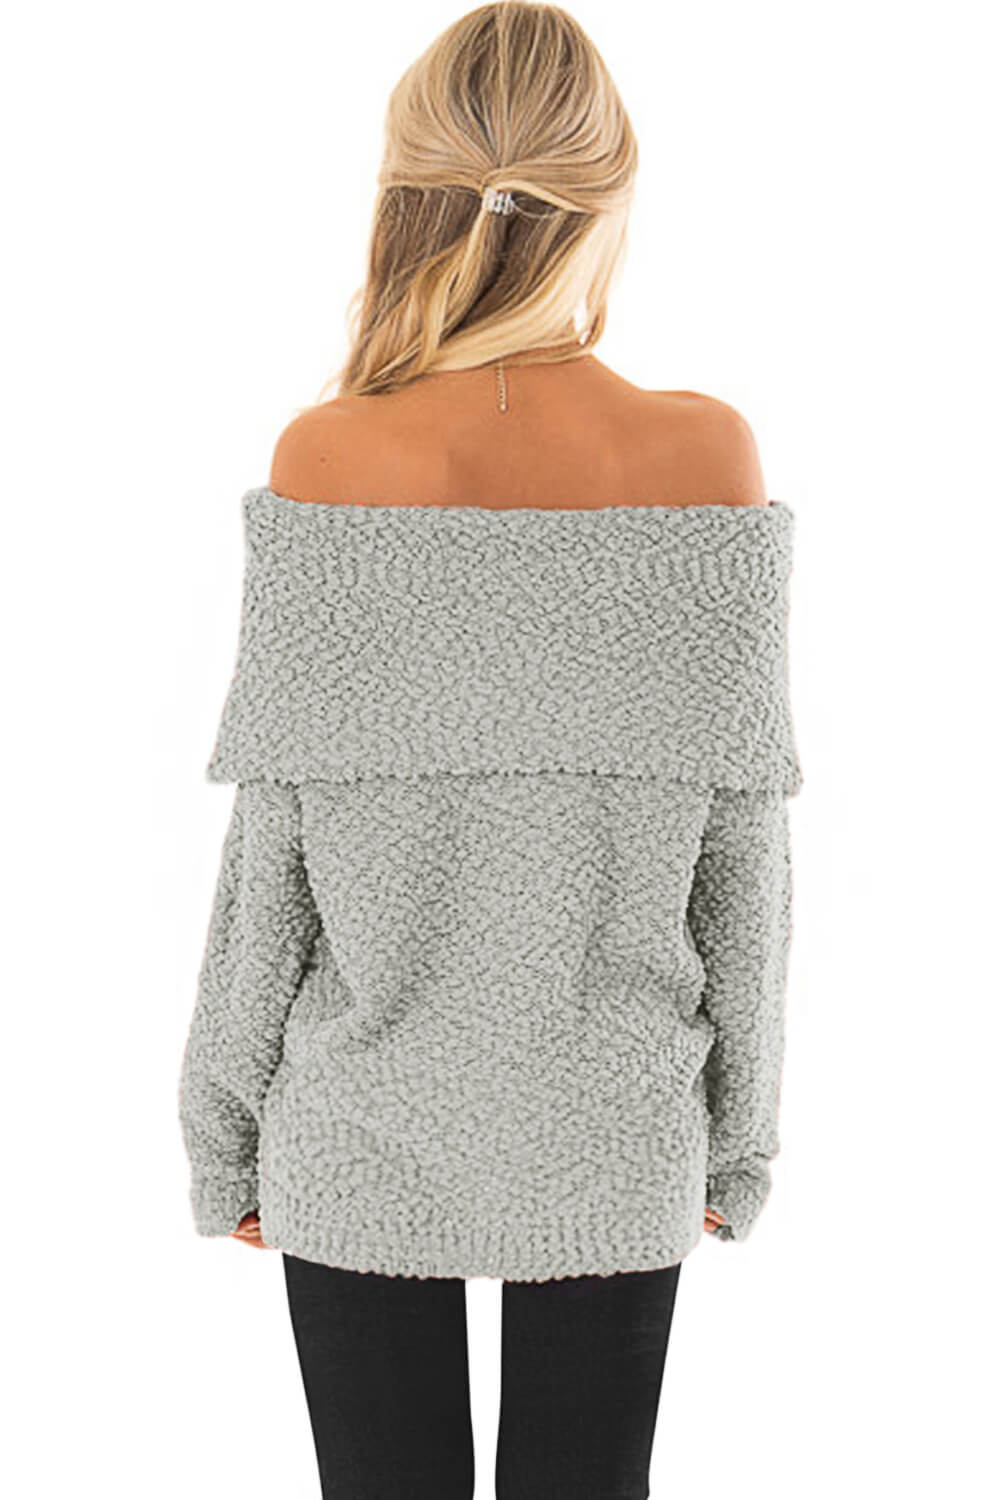 Darby Off The Shoulder Popcorn Sweater in Grey